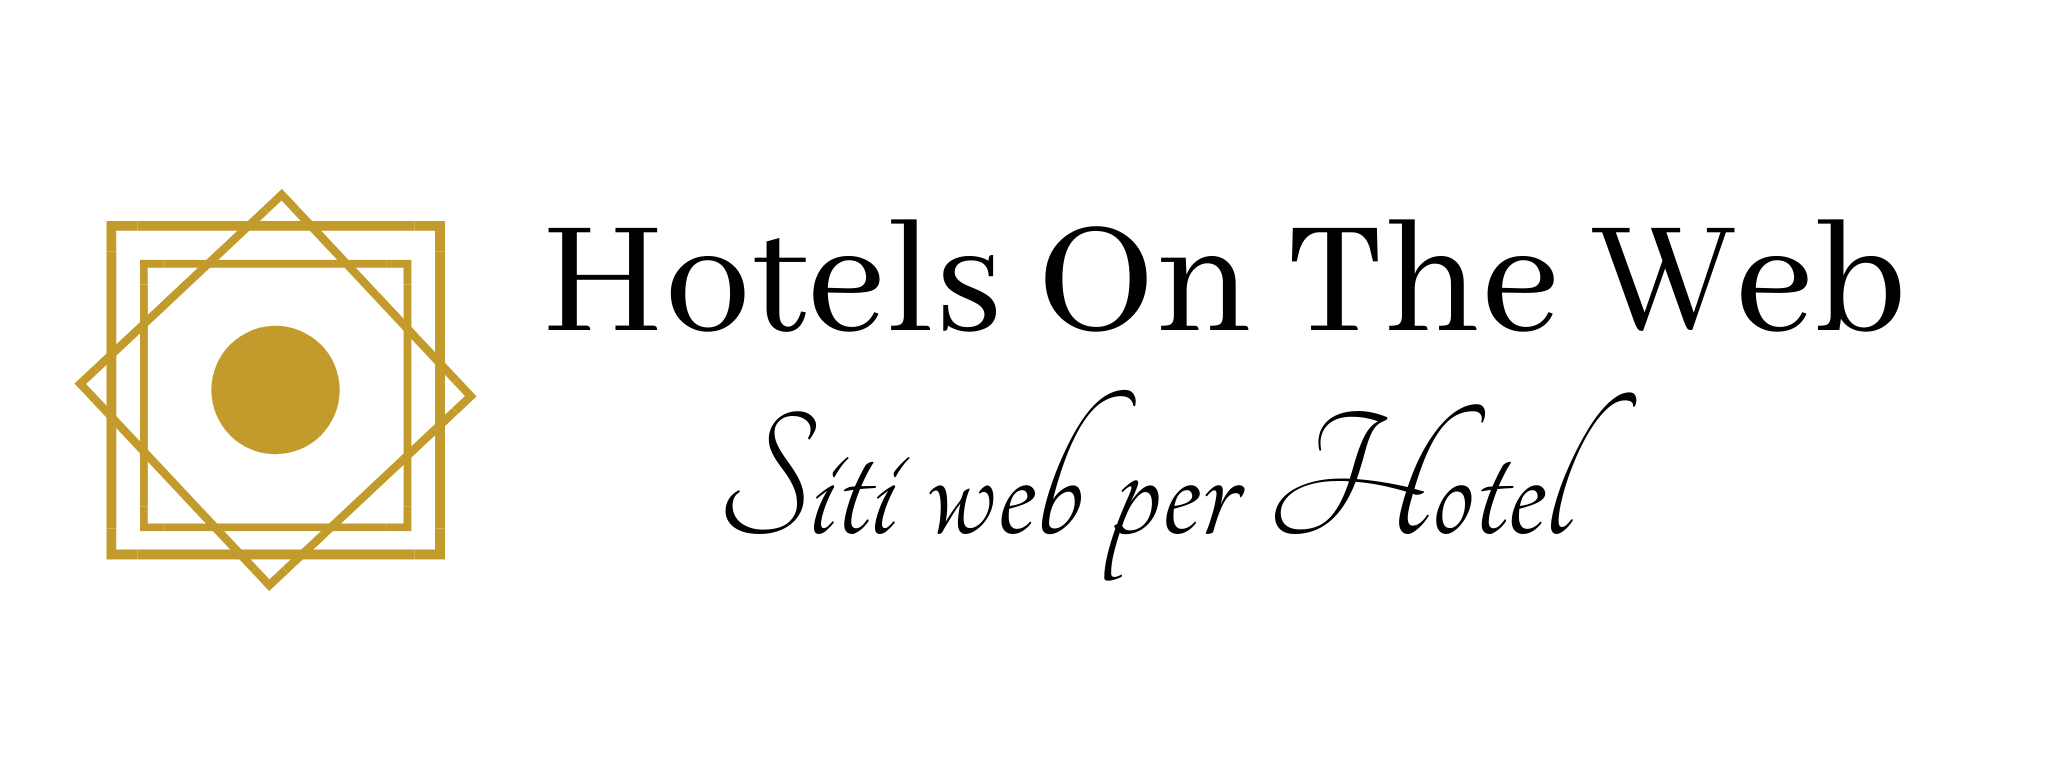 Hotels On The Web